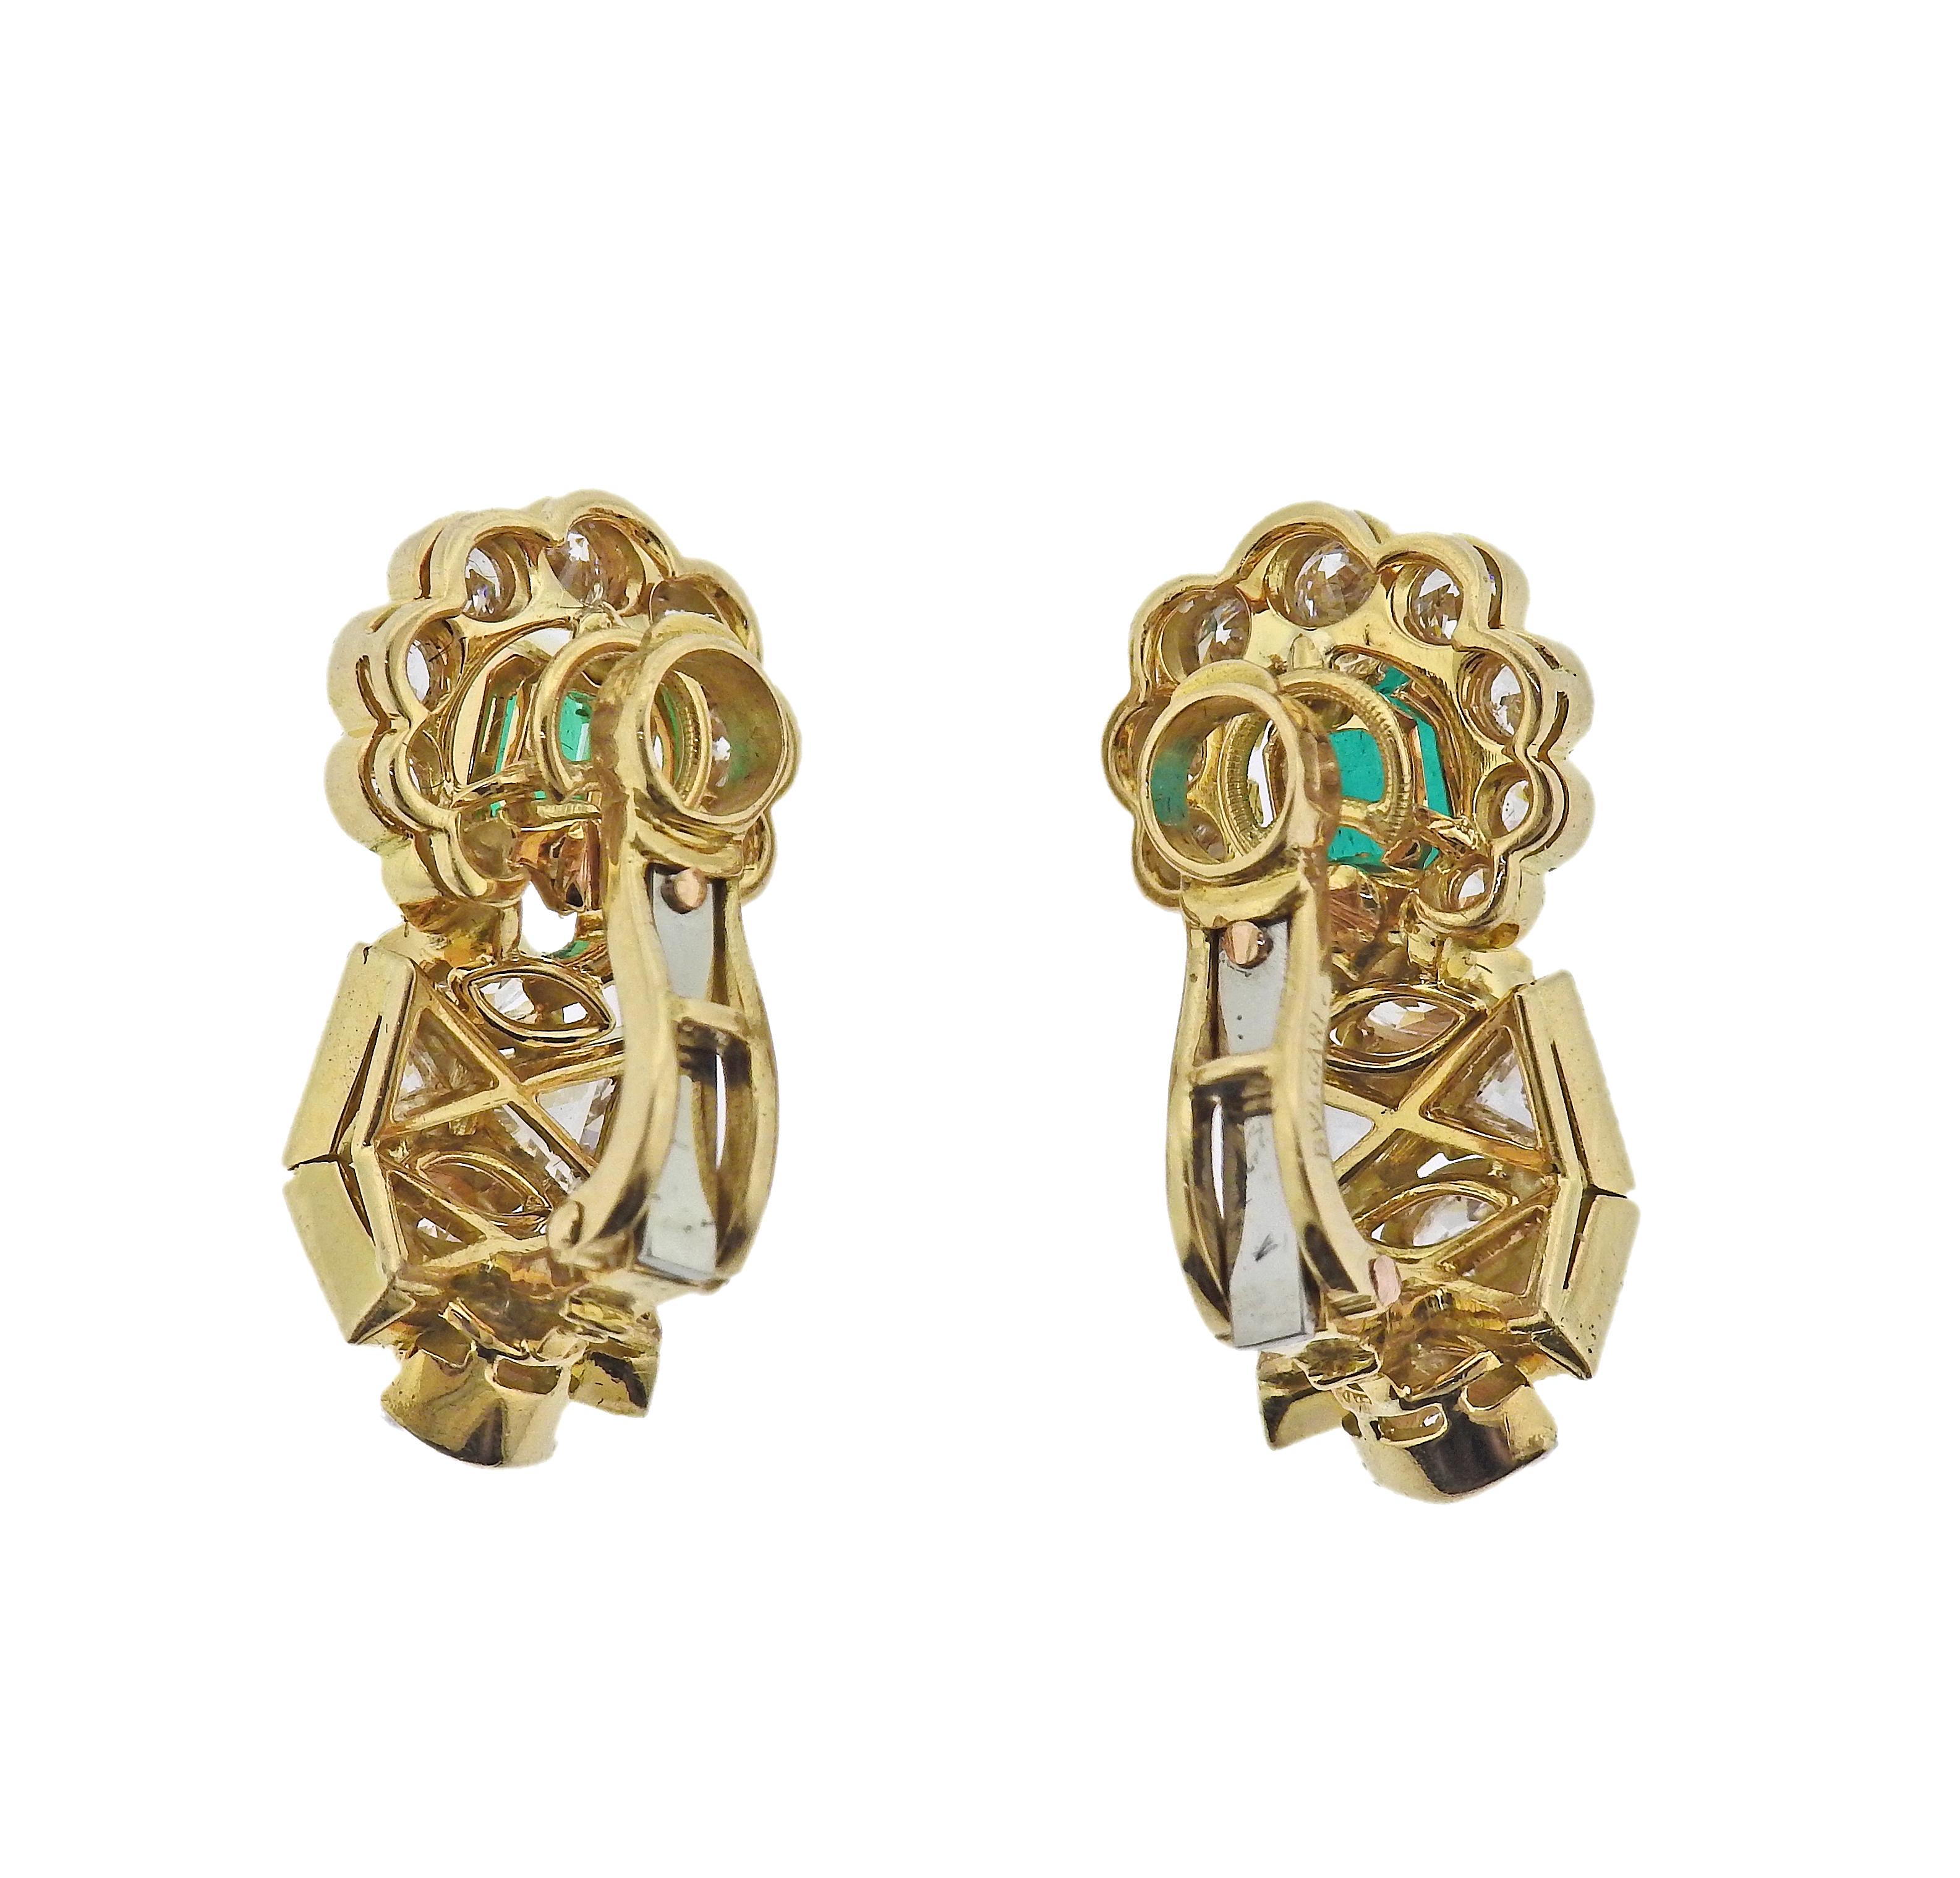 Pair of 18k gold earrings by Bvlgari, with approx. 1.10ct emerald each, surrounded with approx. 4.60-5.00ctw in mixed cut diamonds. Earrings measure 25mm x 14mm. Marked: Bvlgari, 750. Weight - 11.3 grams.